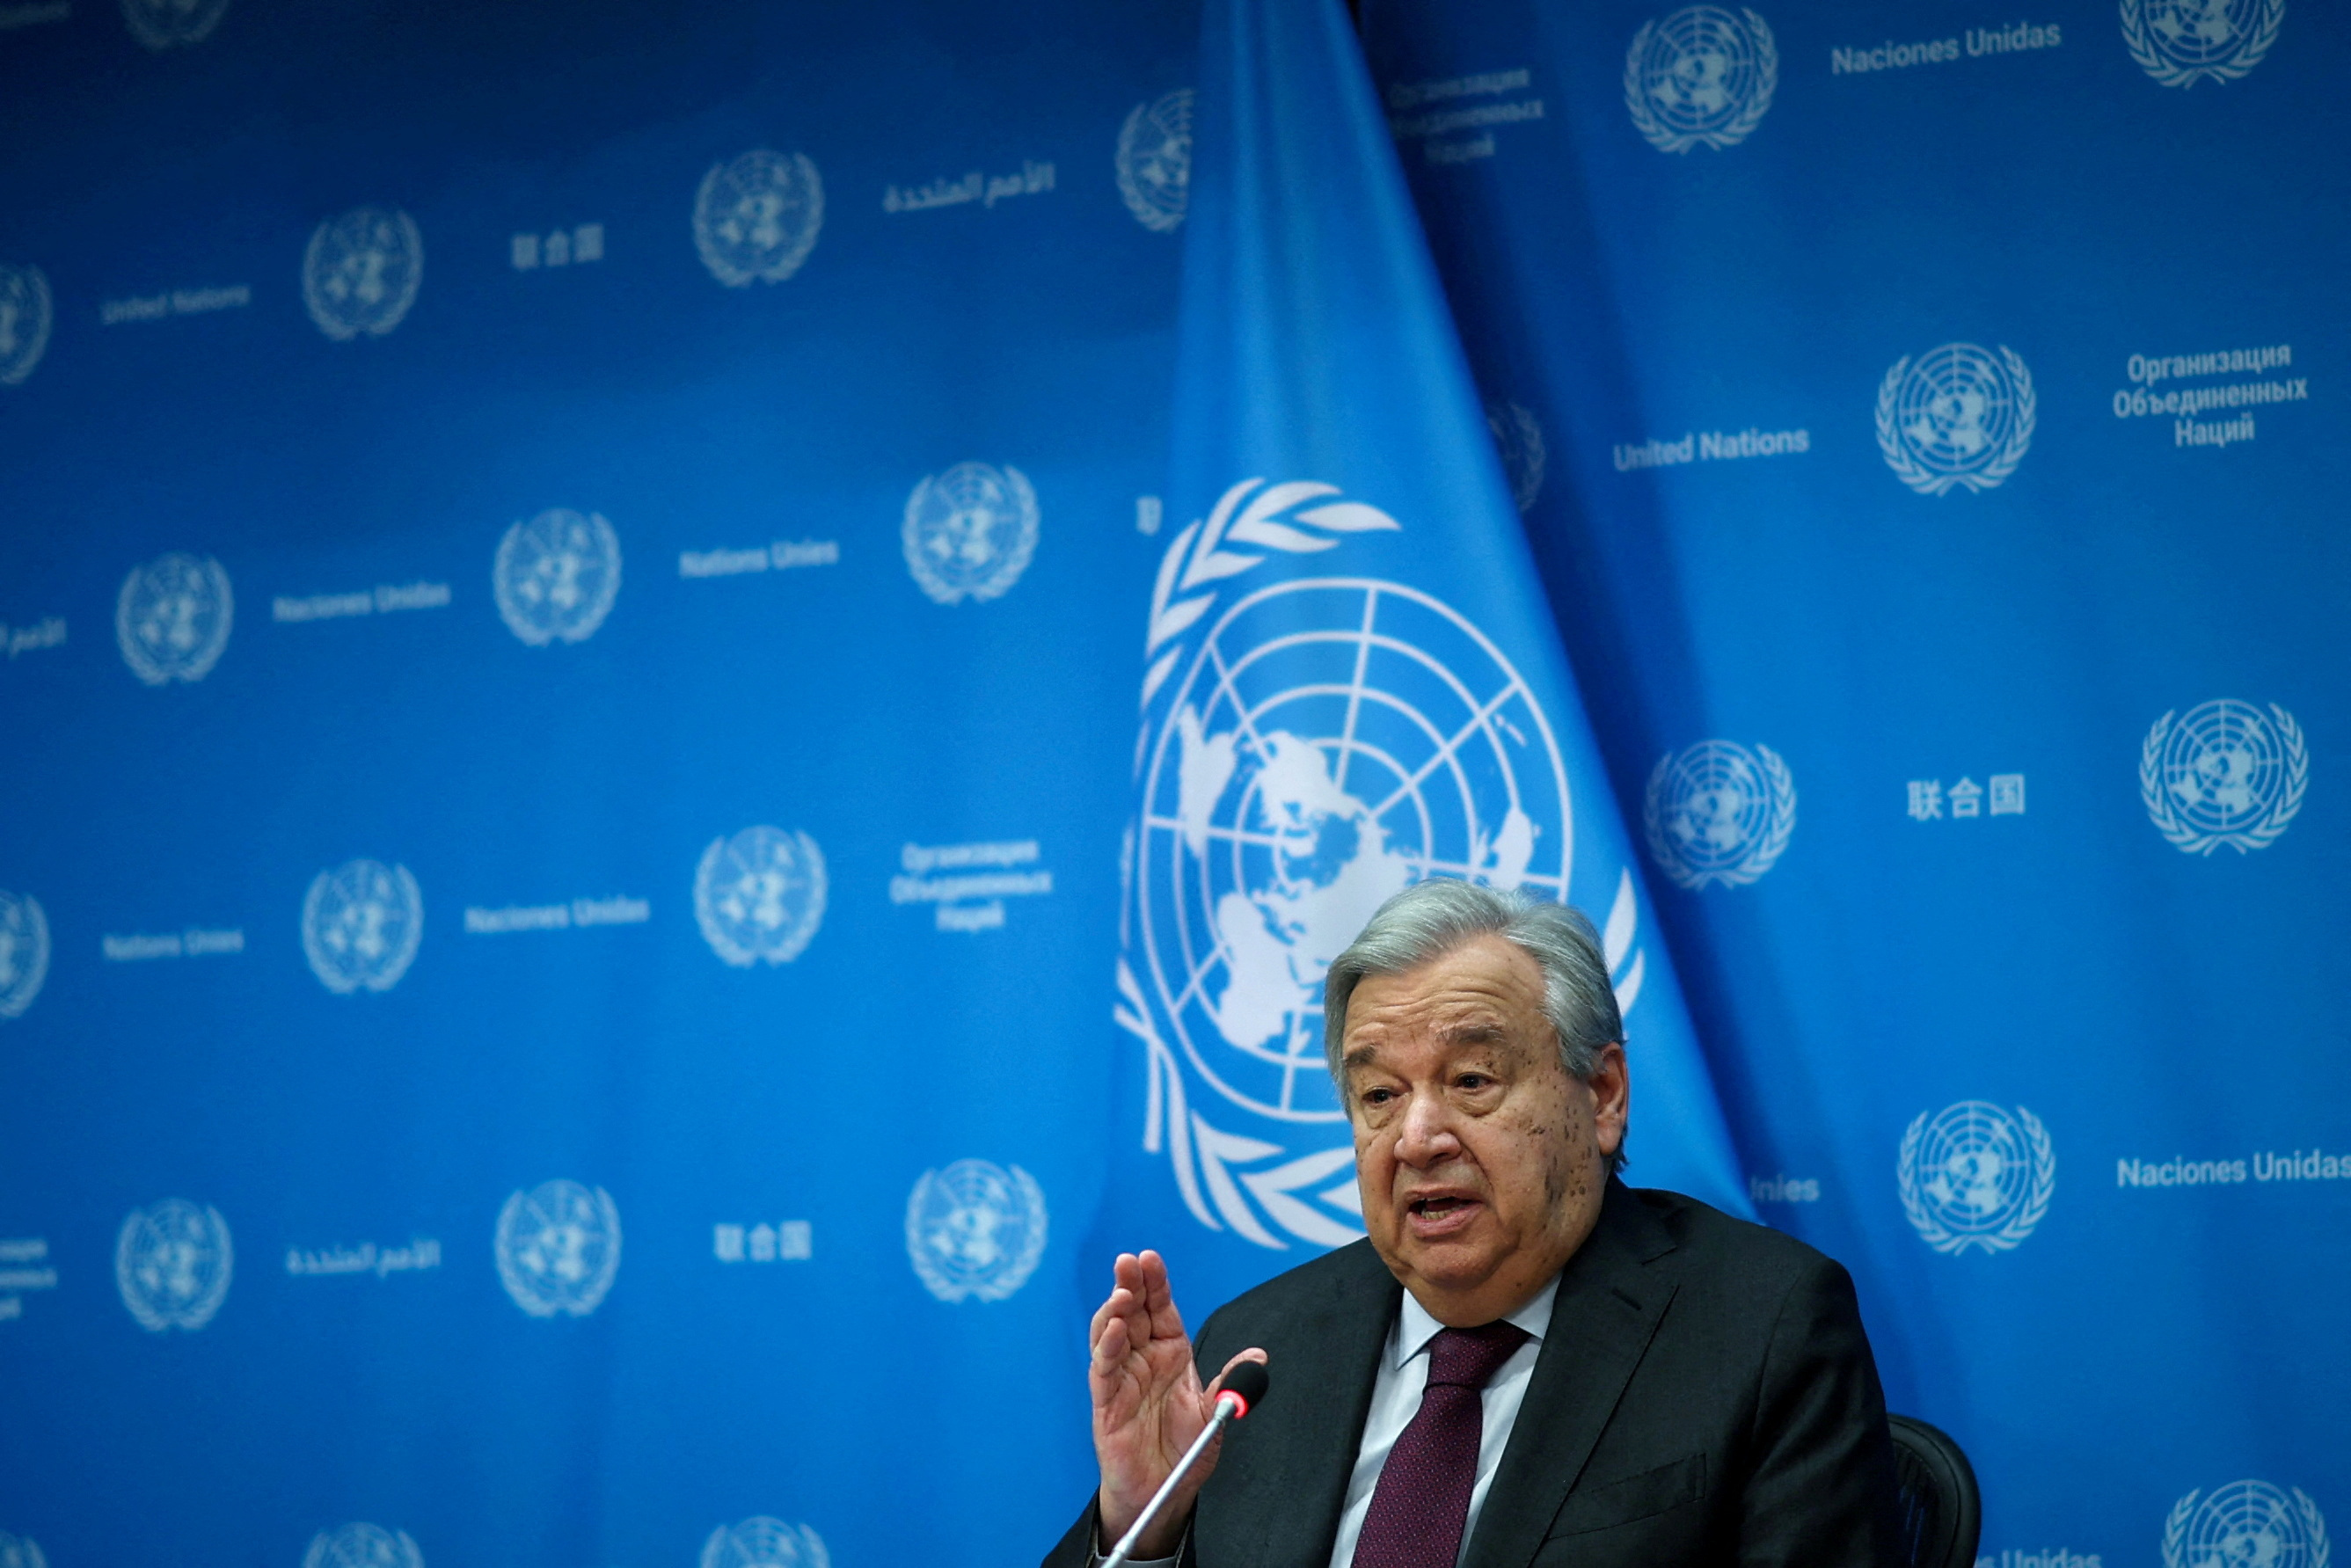 United Nations Secretary General Antonio Guterres holds press conference at U.N. headquarters in New York